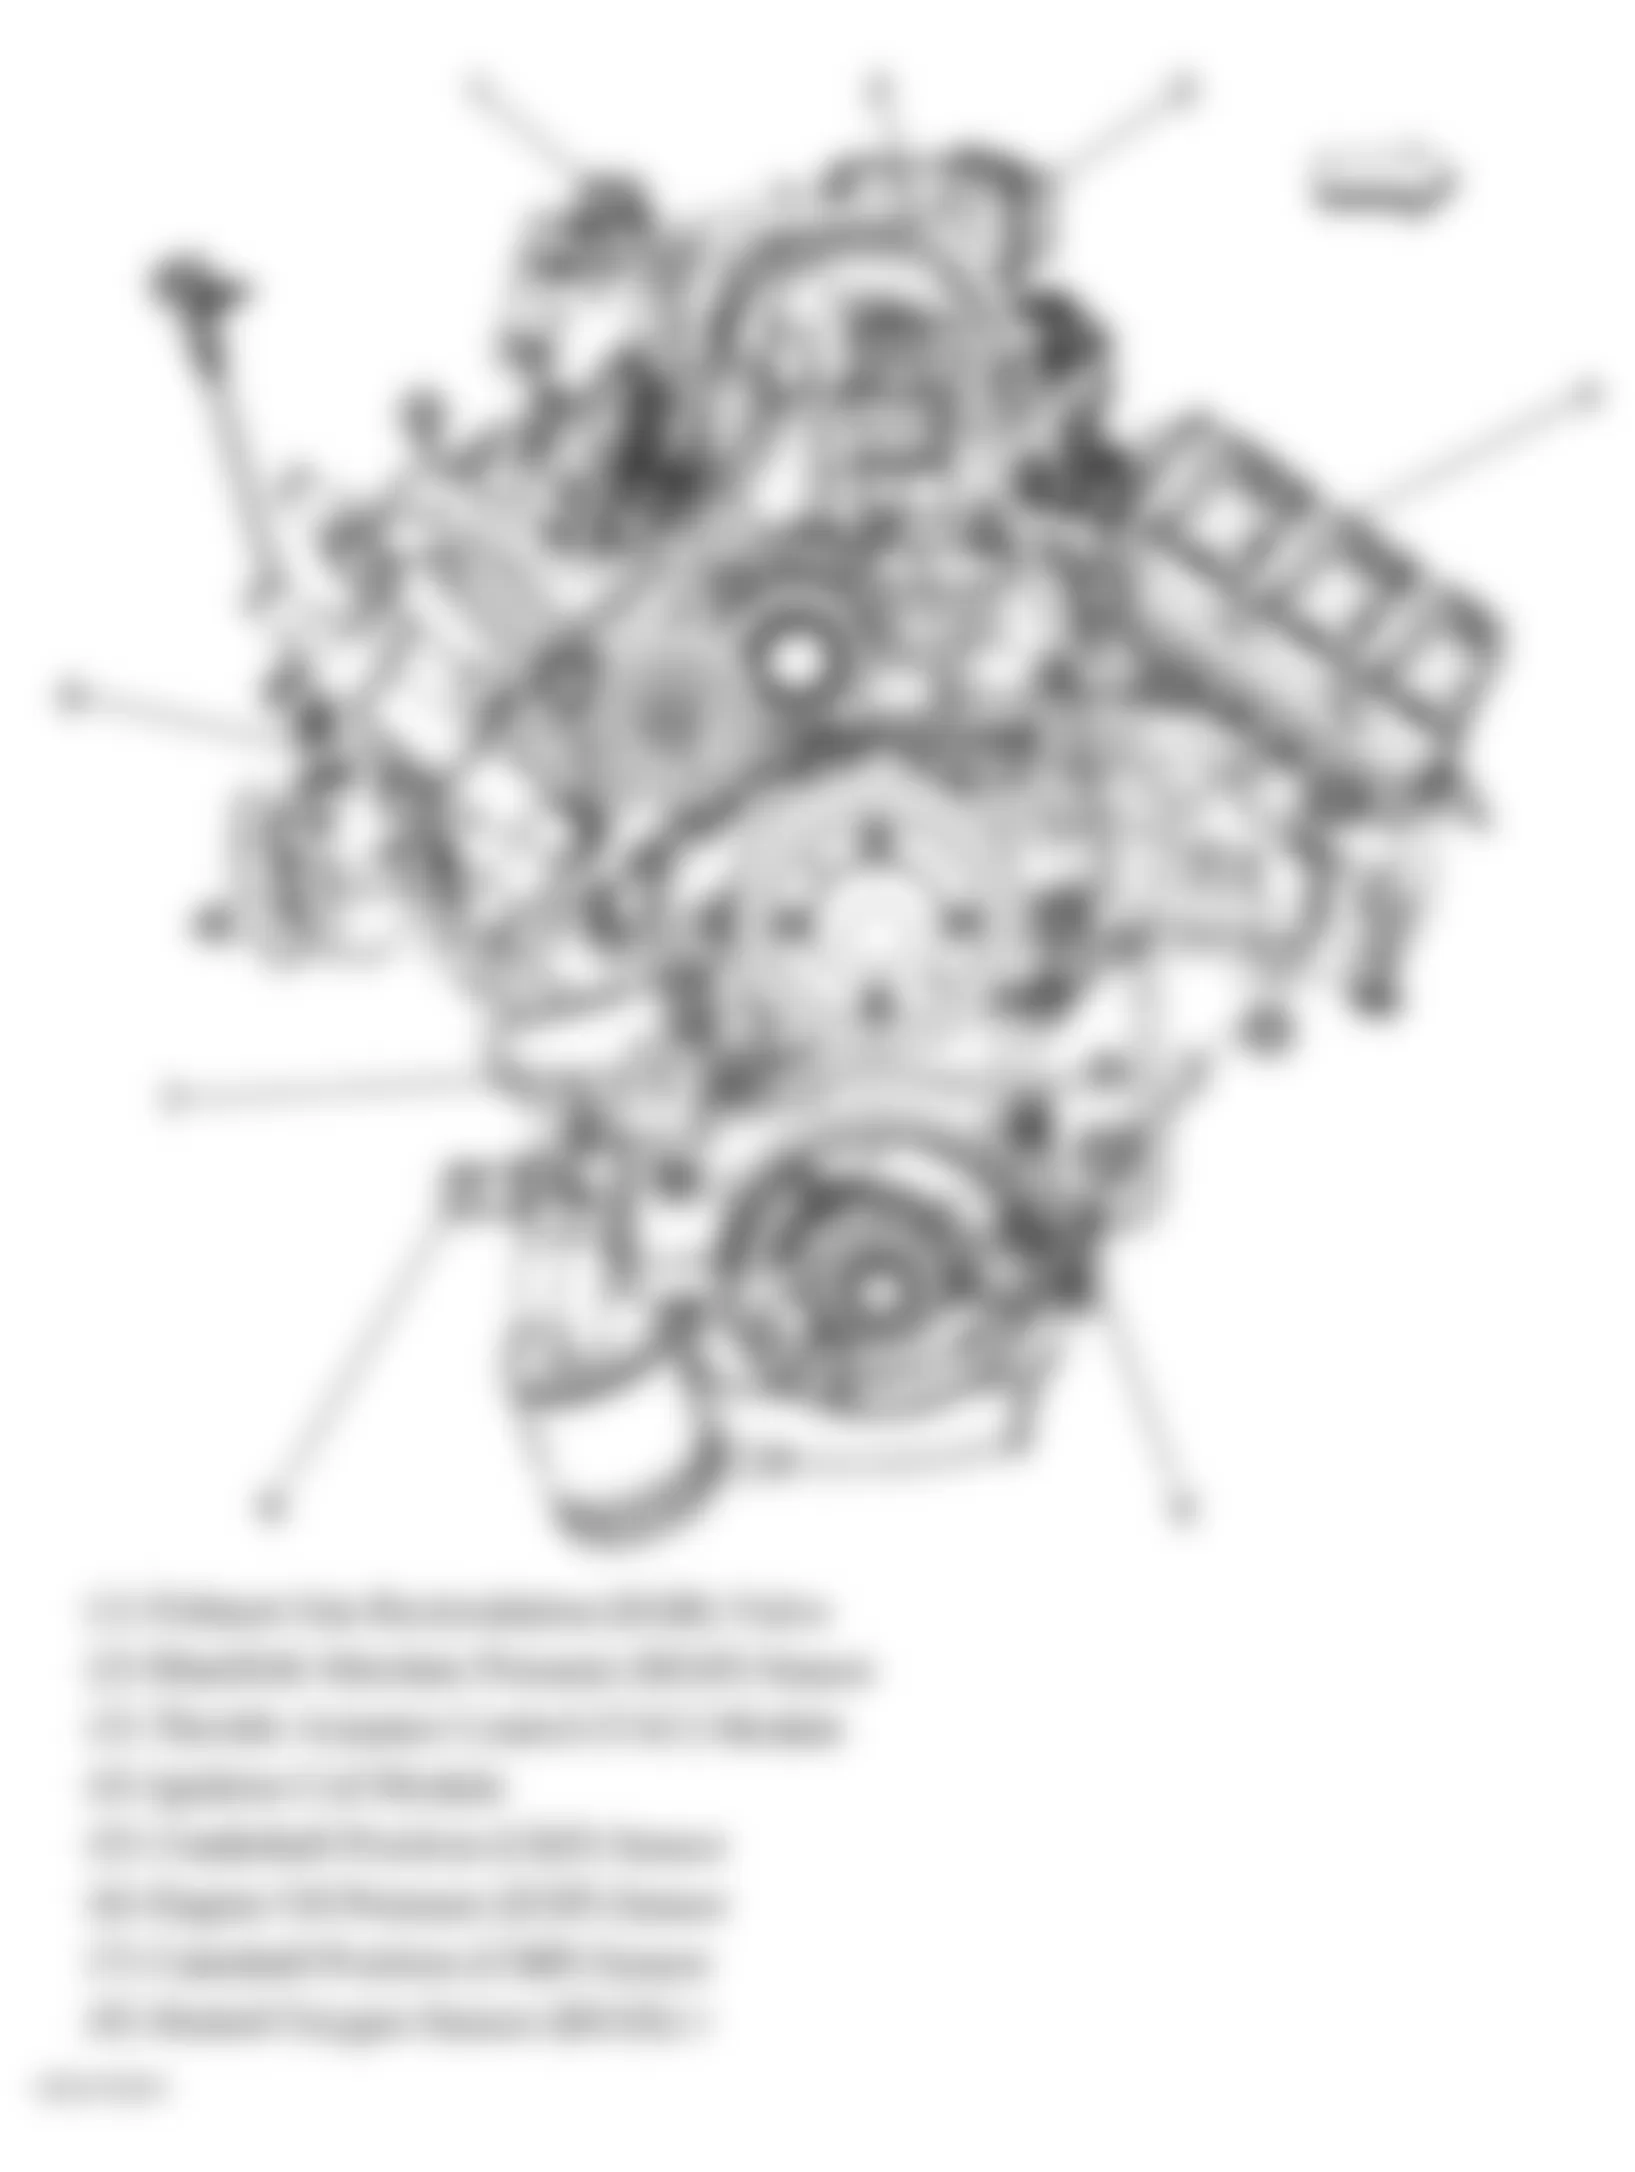 Buick Lucerne CXL 2008 - Component Locations -  Front Of Engine (3.8L)